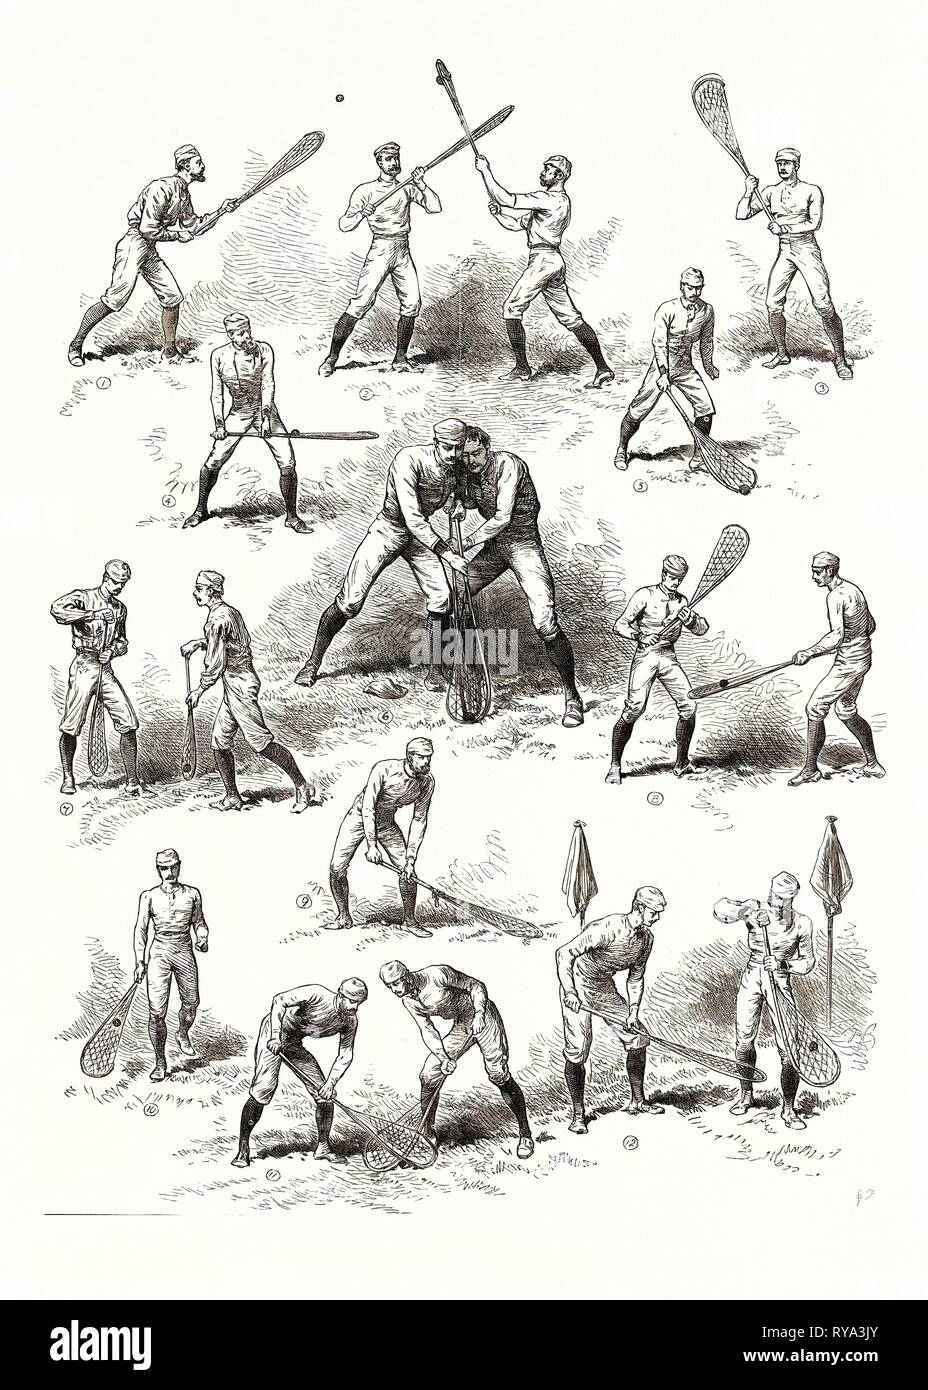 The Canadian Game of La Crosse: 1. Catching. 2. And 3. Checking. 4. Long Throw. 5. Picking Up. 6. A Tussle. 7 and 8. Dodging and Checking. 9. Flat Catch. 10. Running. 11. Facing. 12. Throwing and Goal Keeping, 1883 Stock Photo